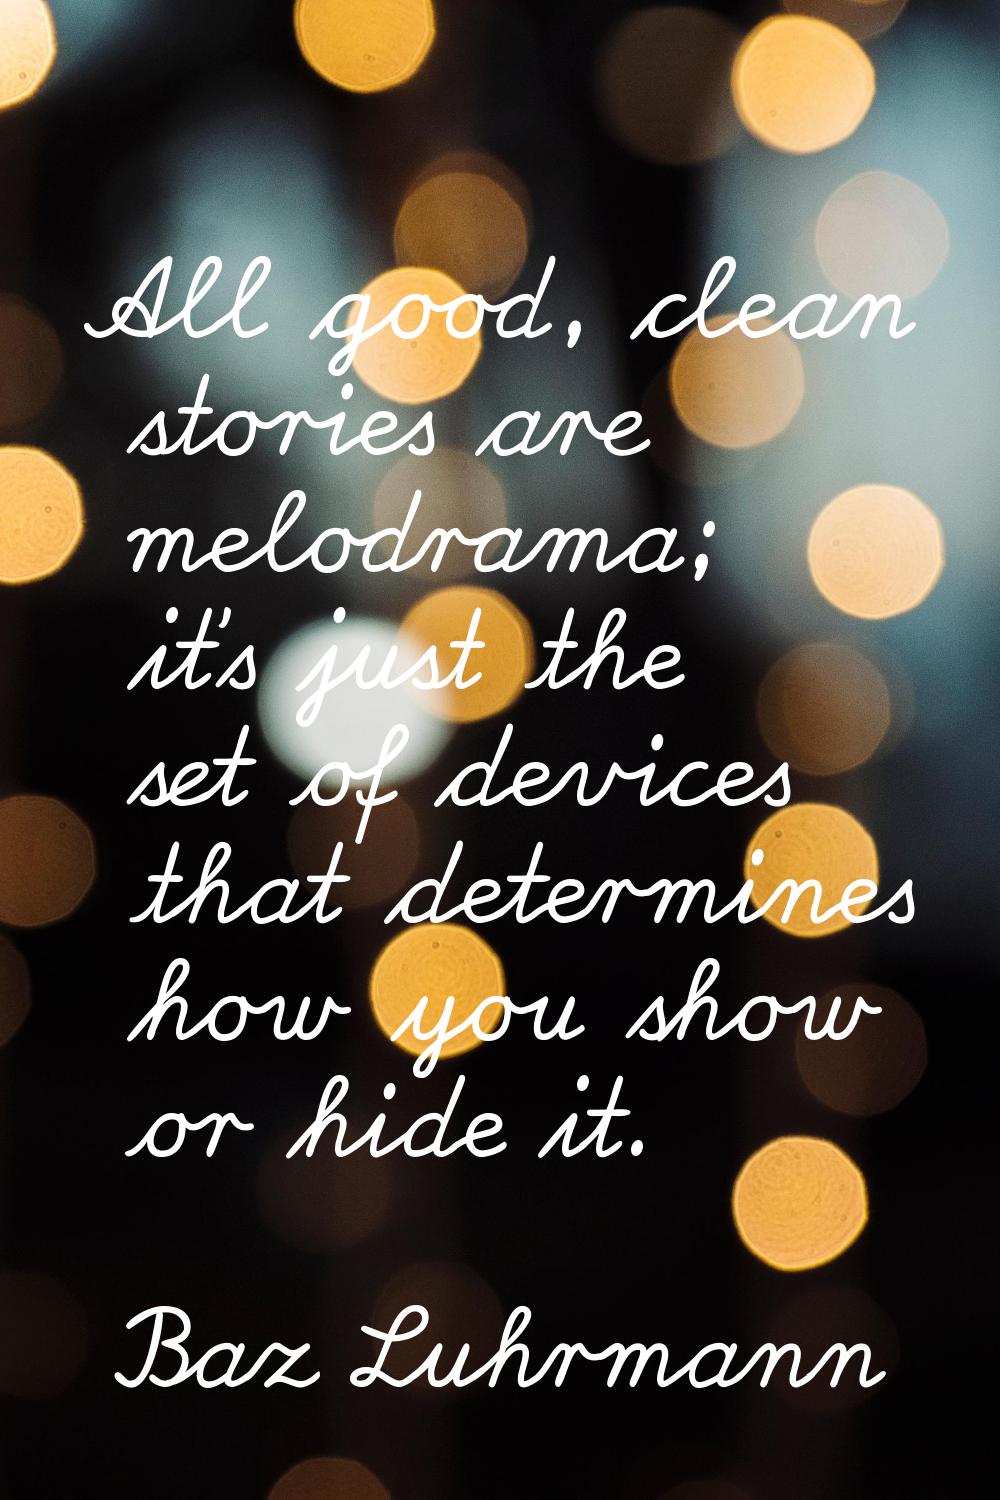 All good, clean stories are melodrama; it's just the set of devices that determines how you show or